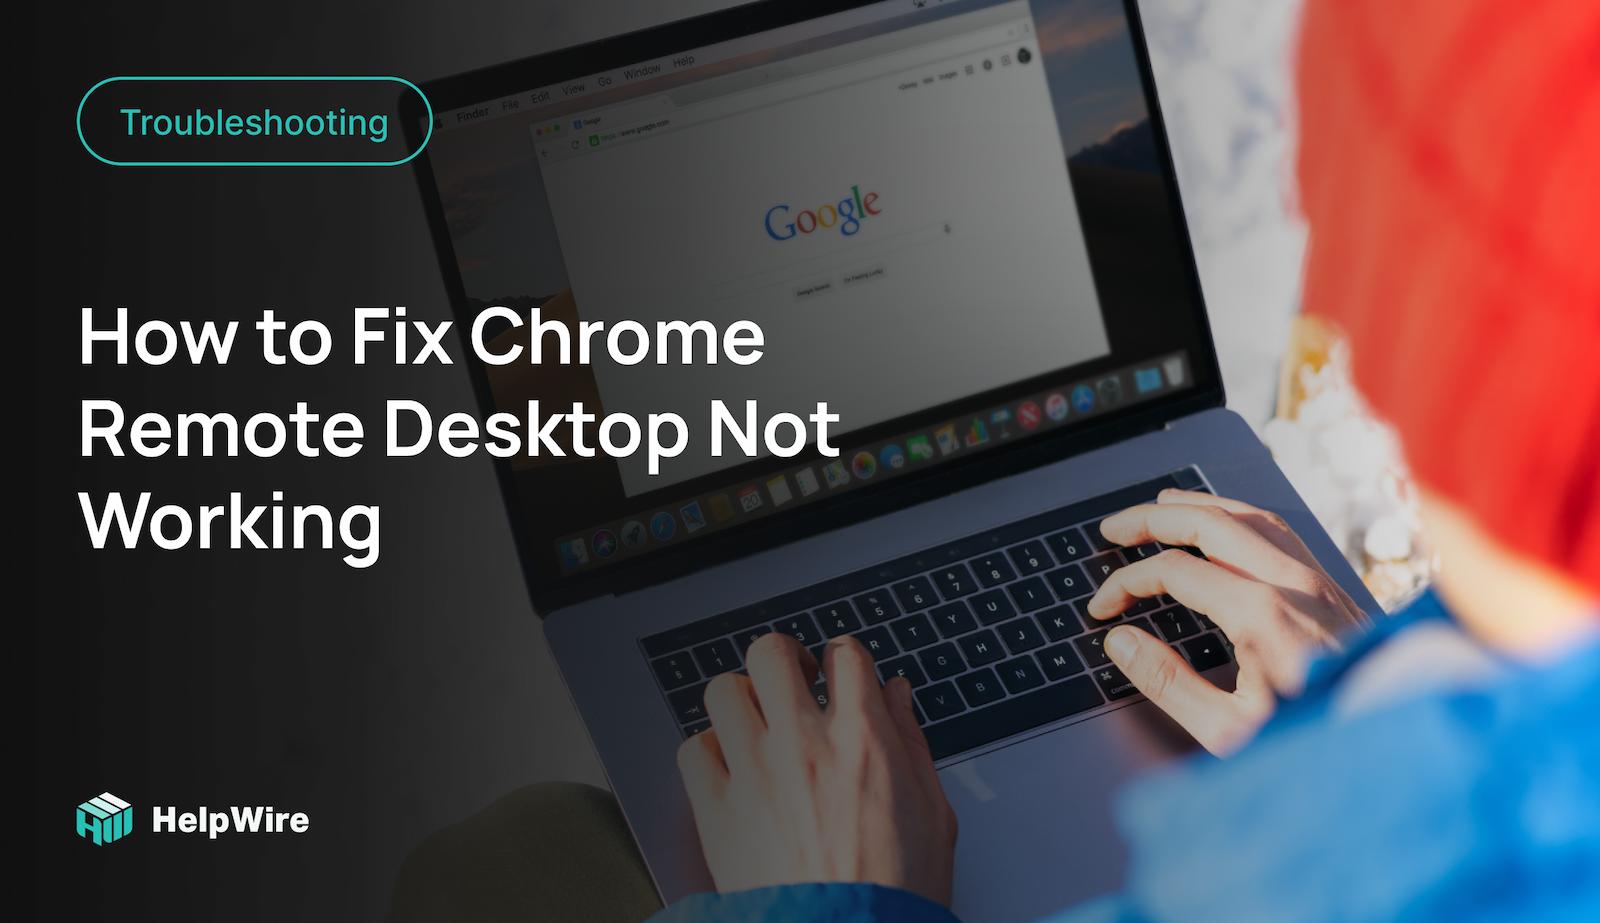 Chrome Remote Desktop Not Working: How to Fix the Issues